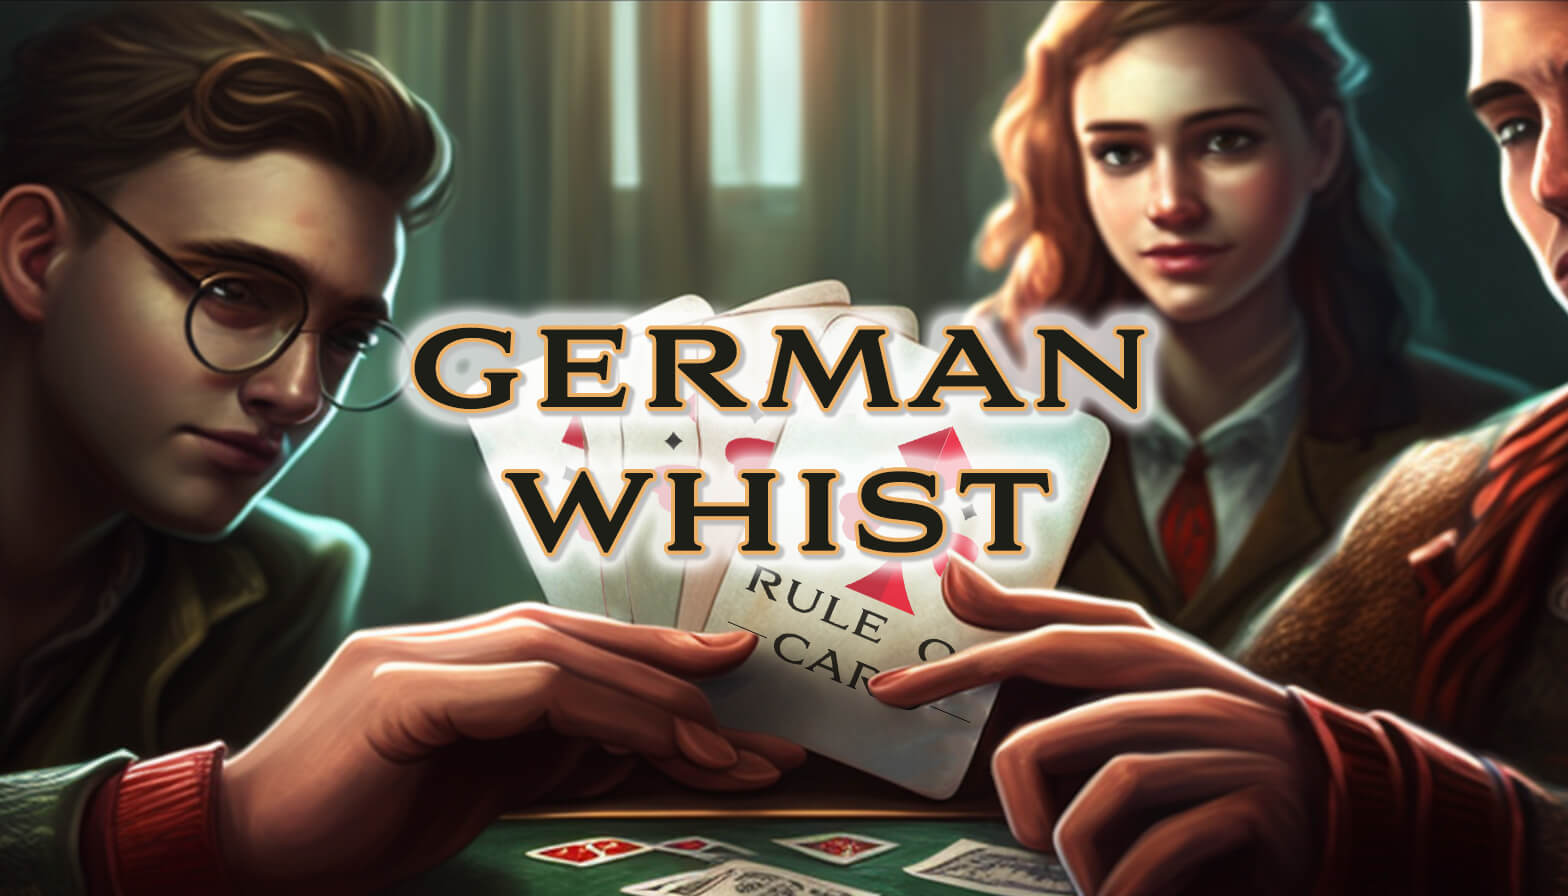 Playing the card game German Whist